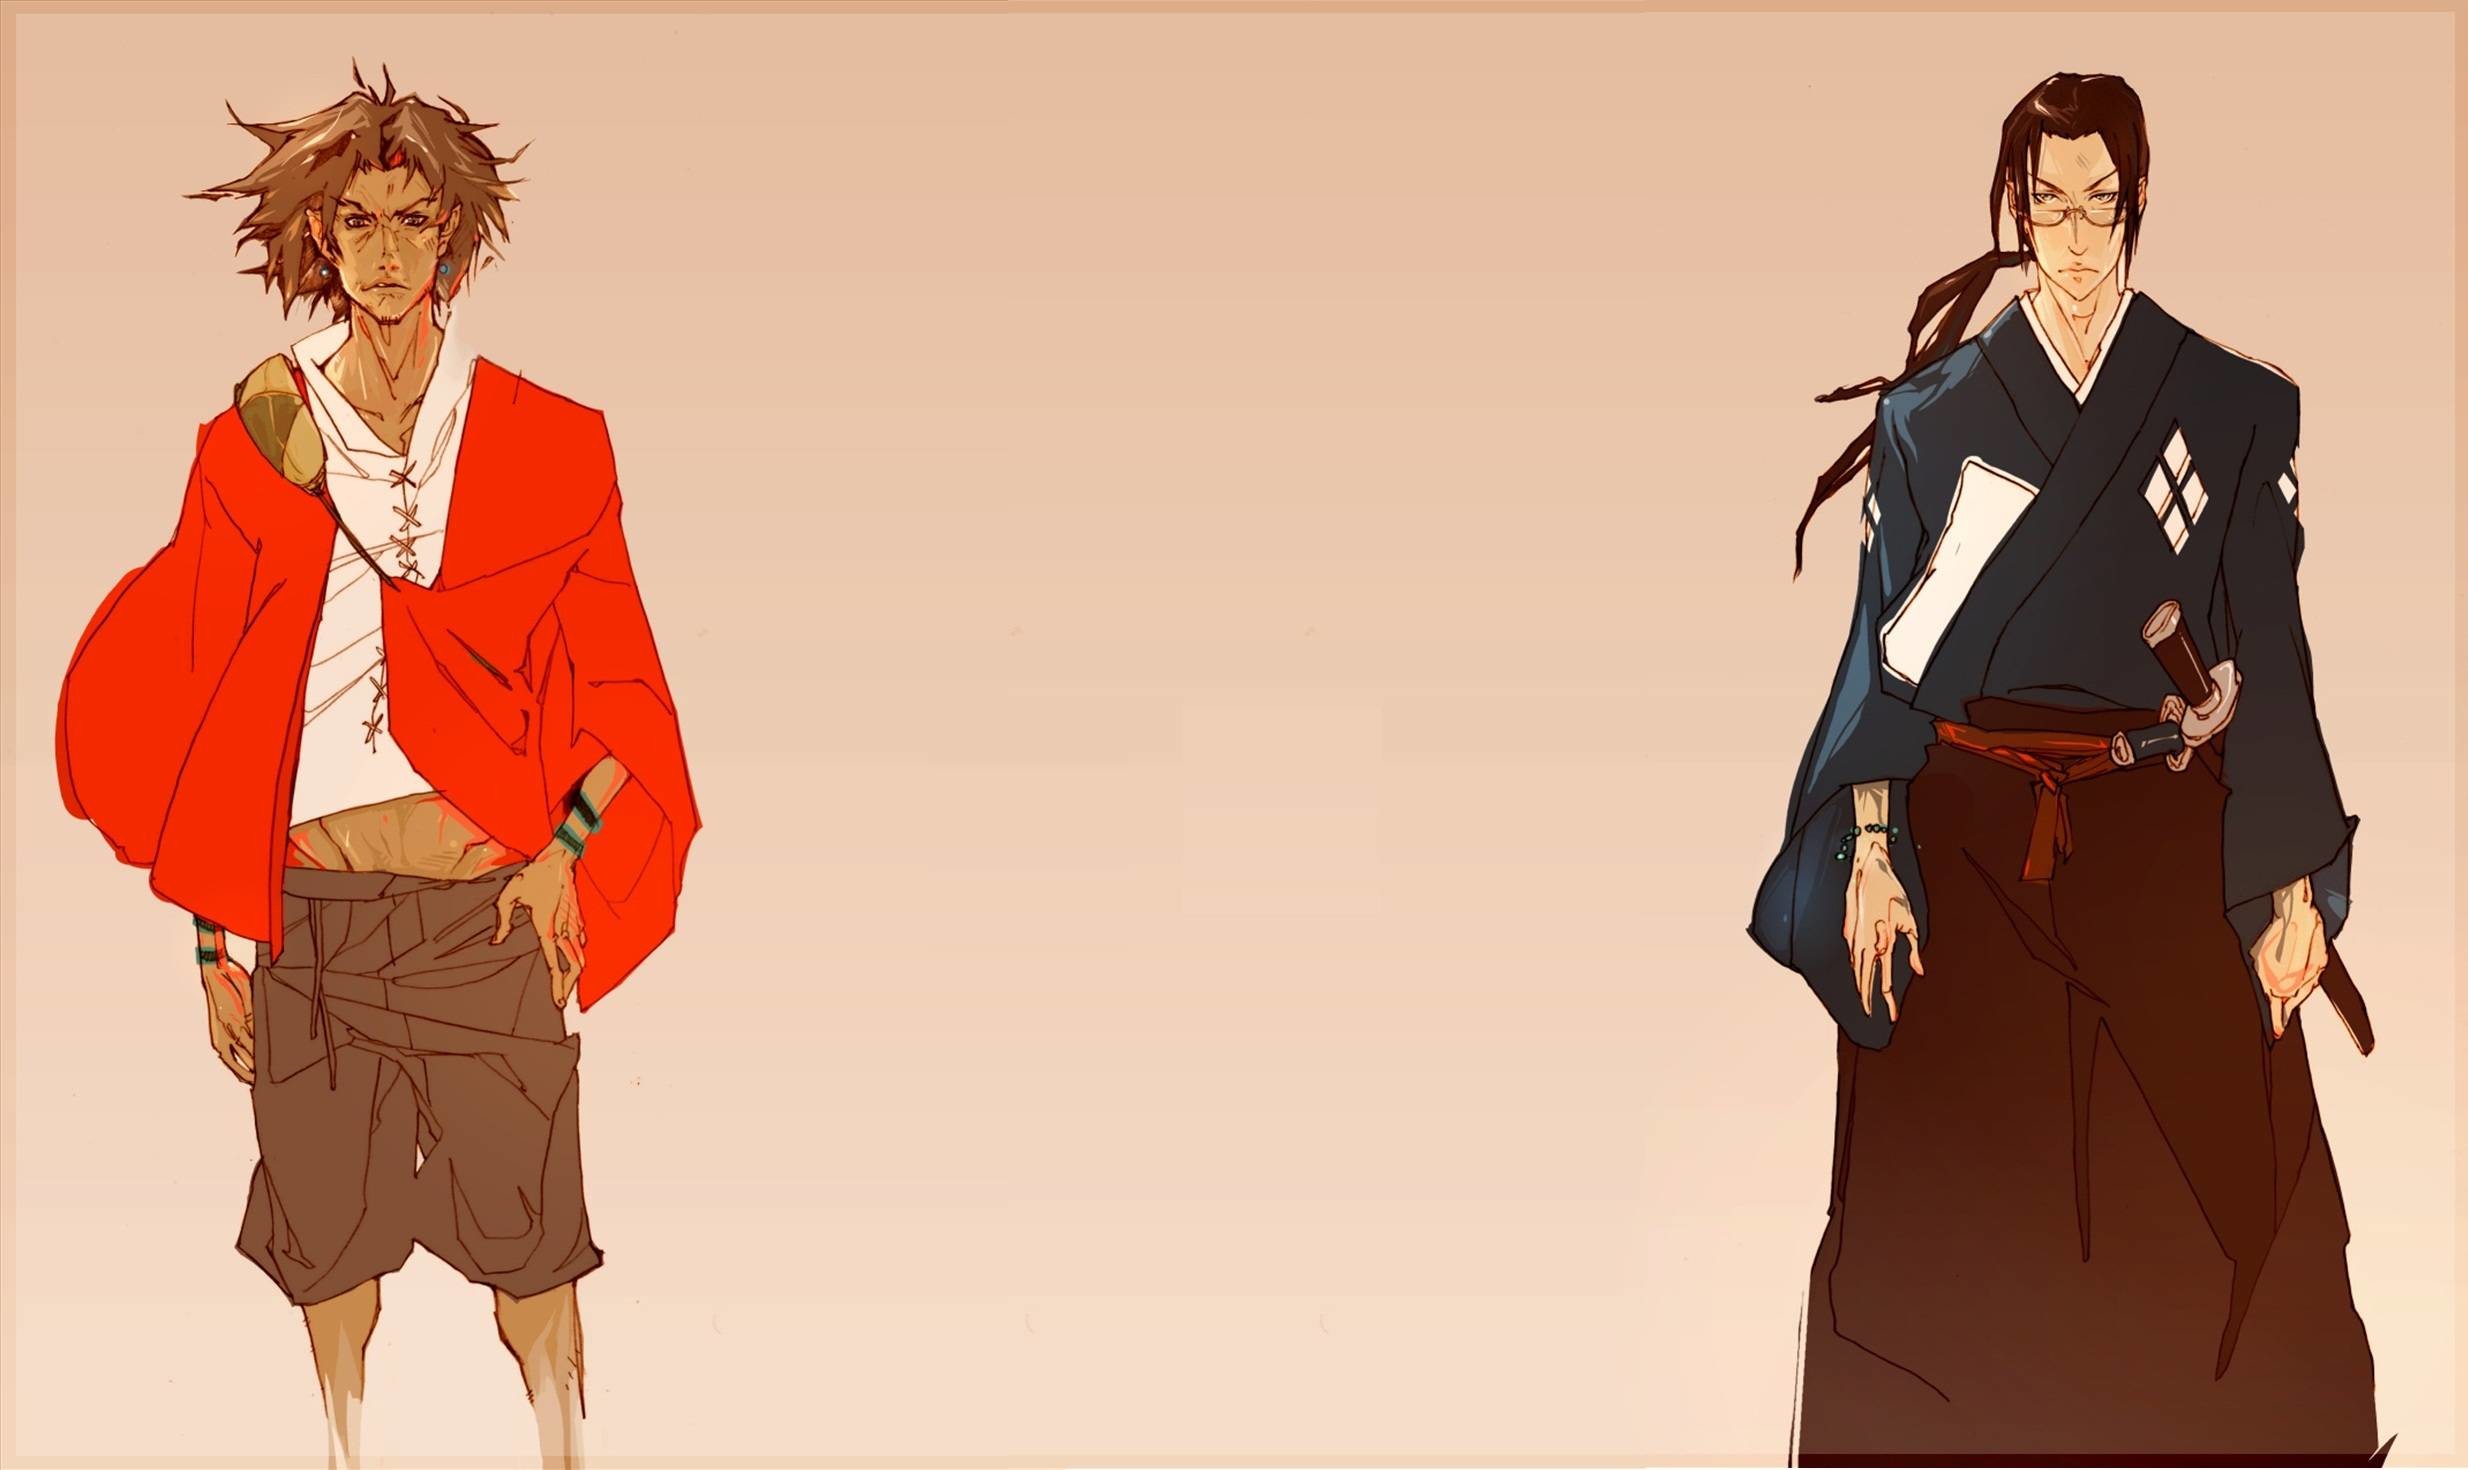 Baby jesus with mother mary mugen and jin fanart – Samurai Champloo Wallpaper